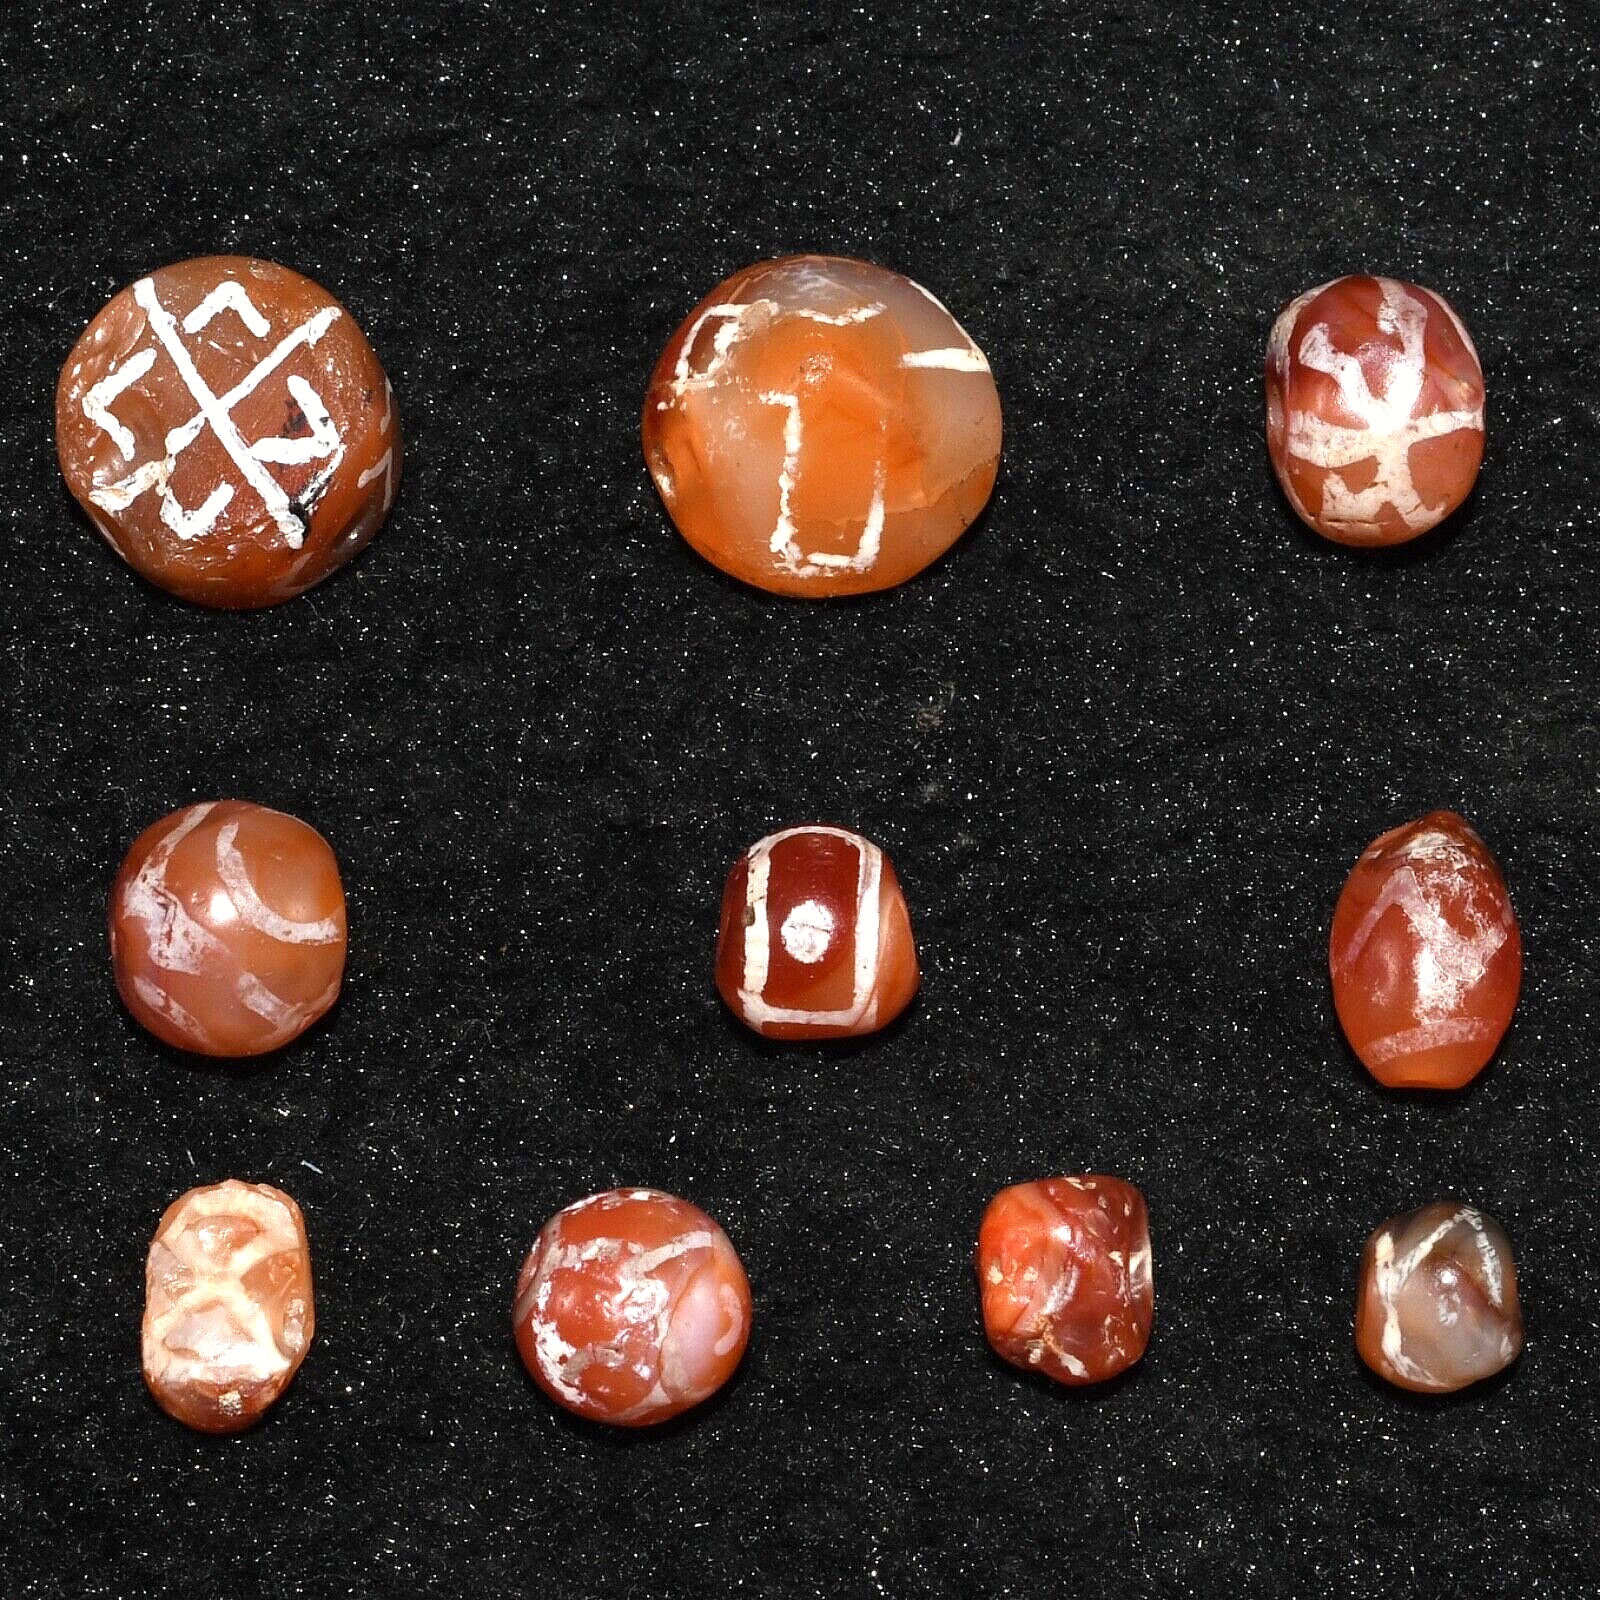 10 Genuine Large Ancient Pyu Culture Etched Carnelian Beads over 1500 Years Old